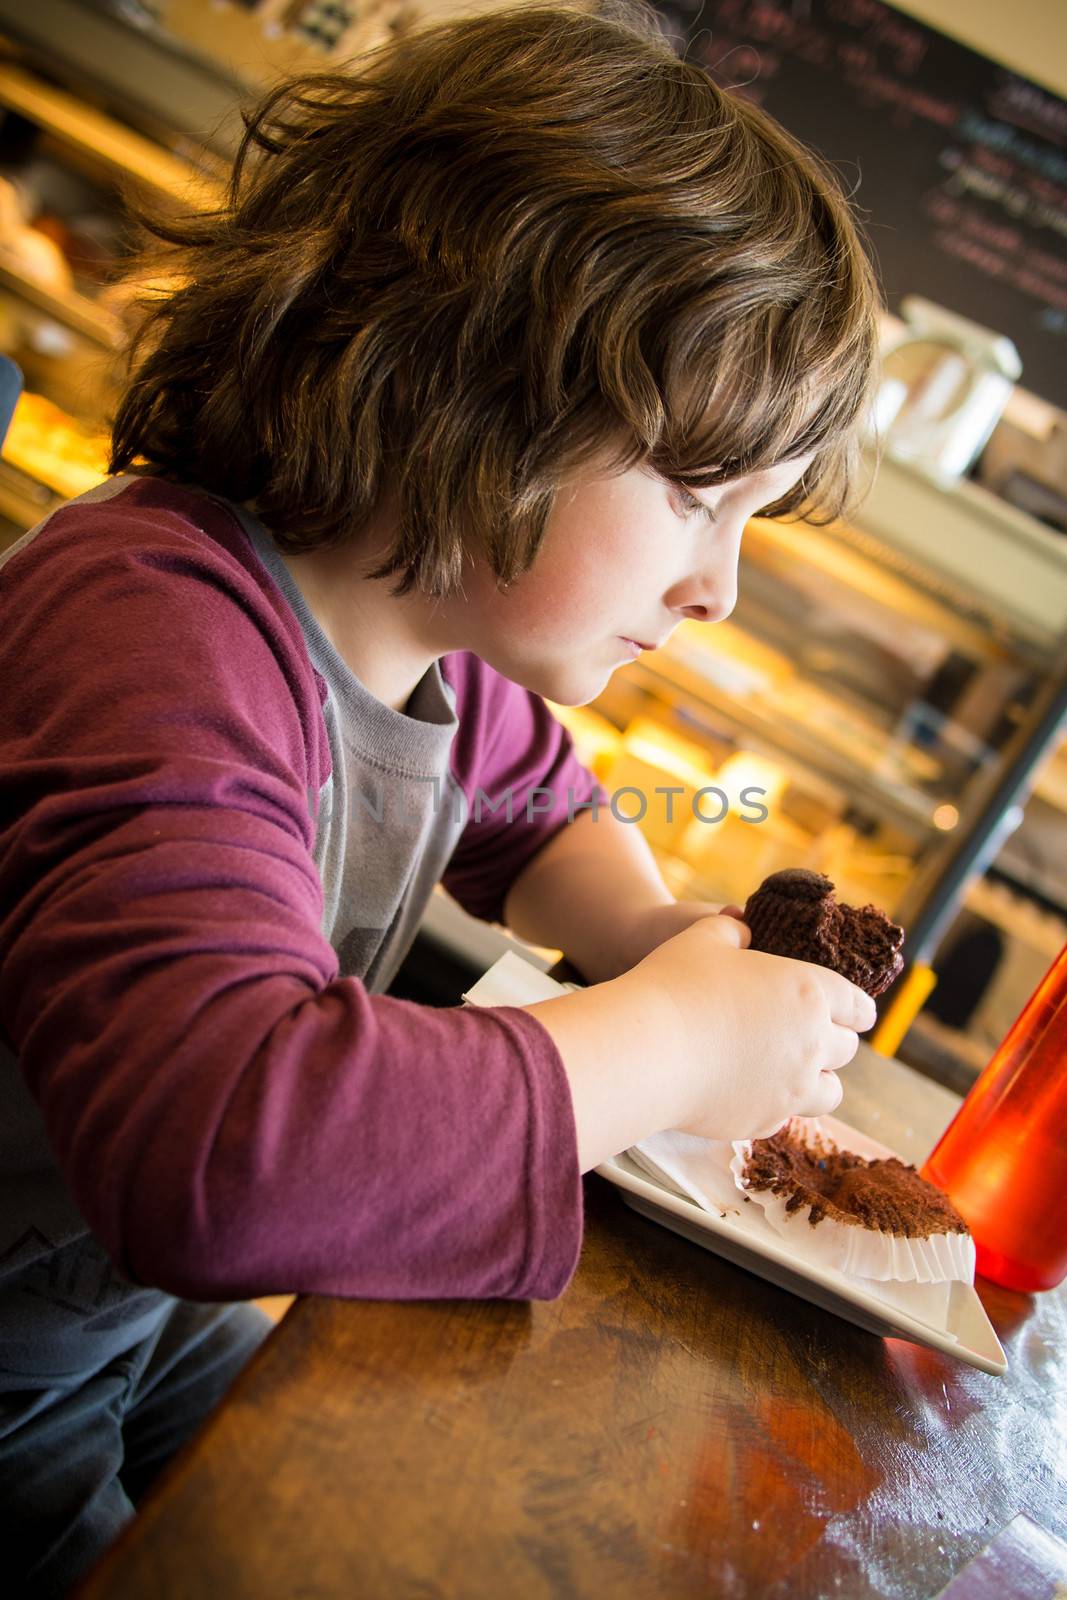 Boy eating a cupcake in a restaurant